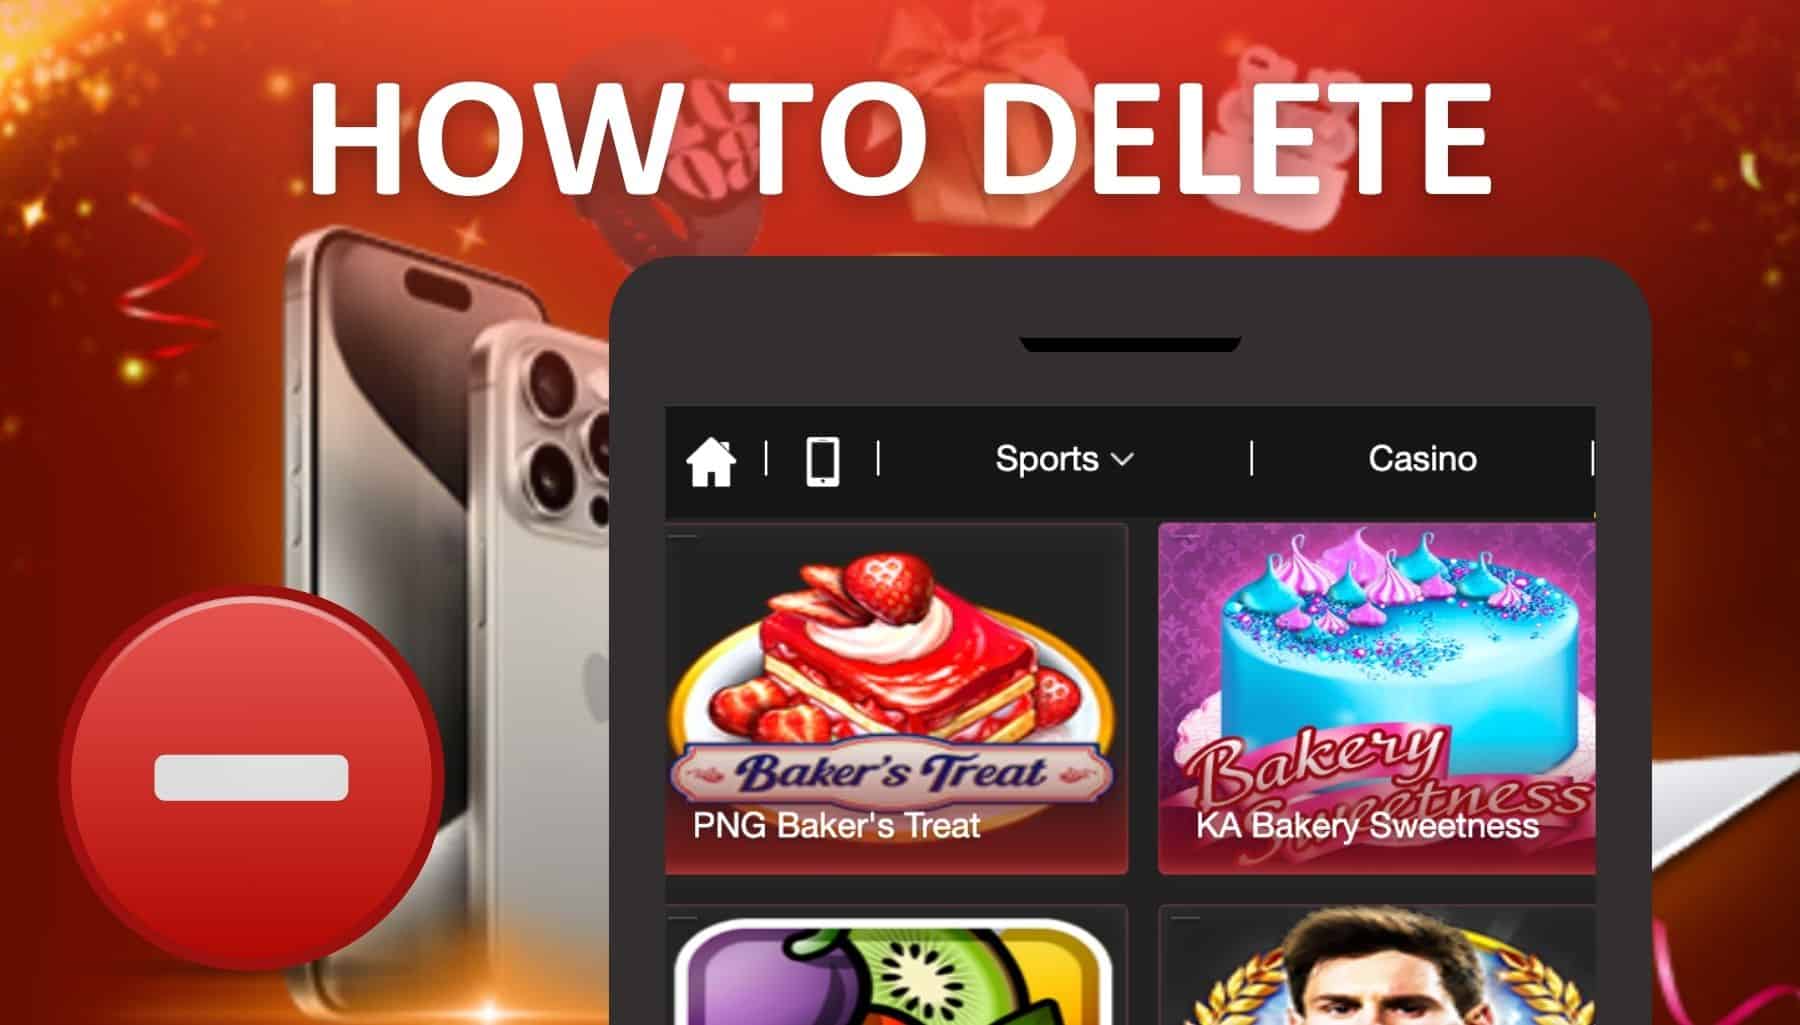 How to Delete Marvelbet India Application guide